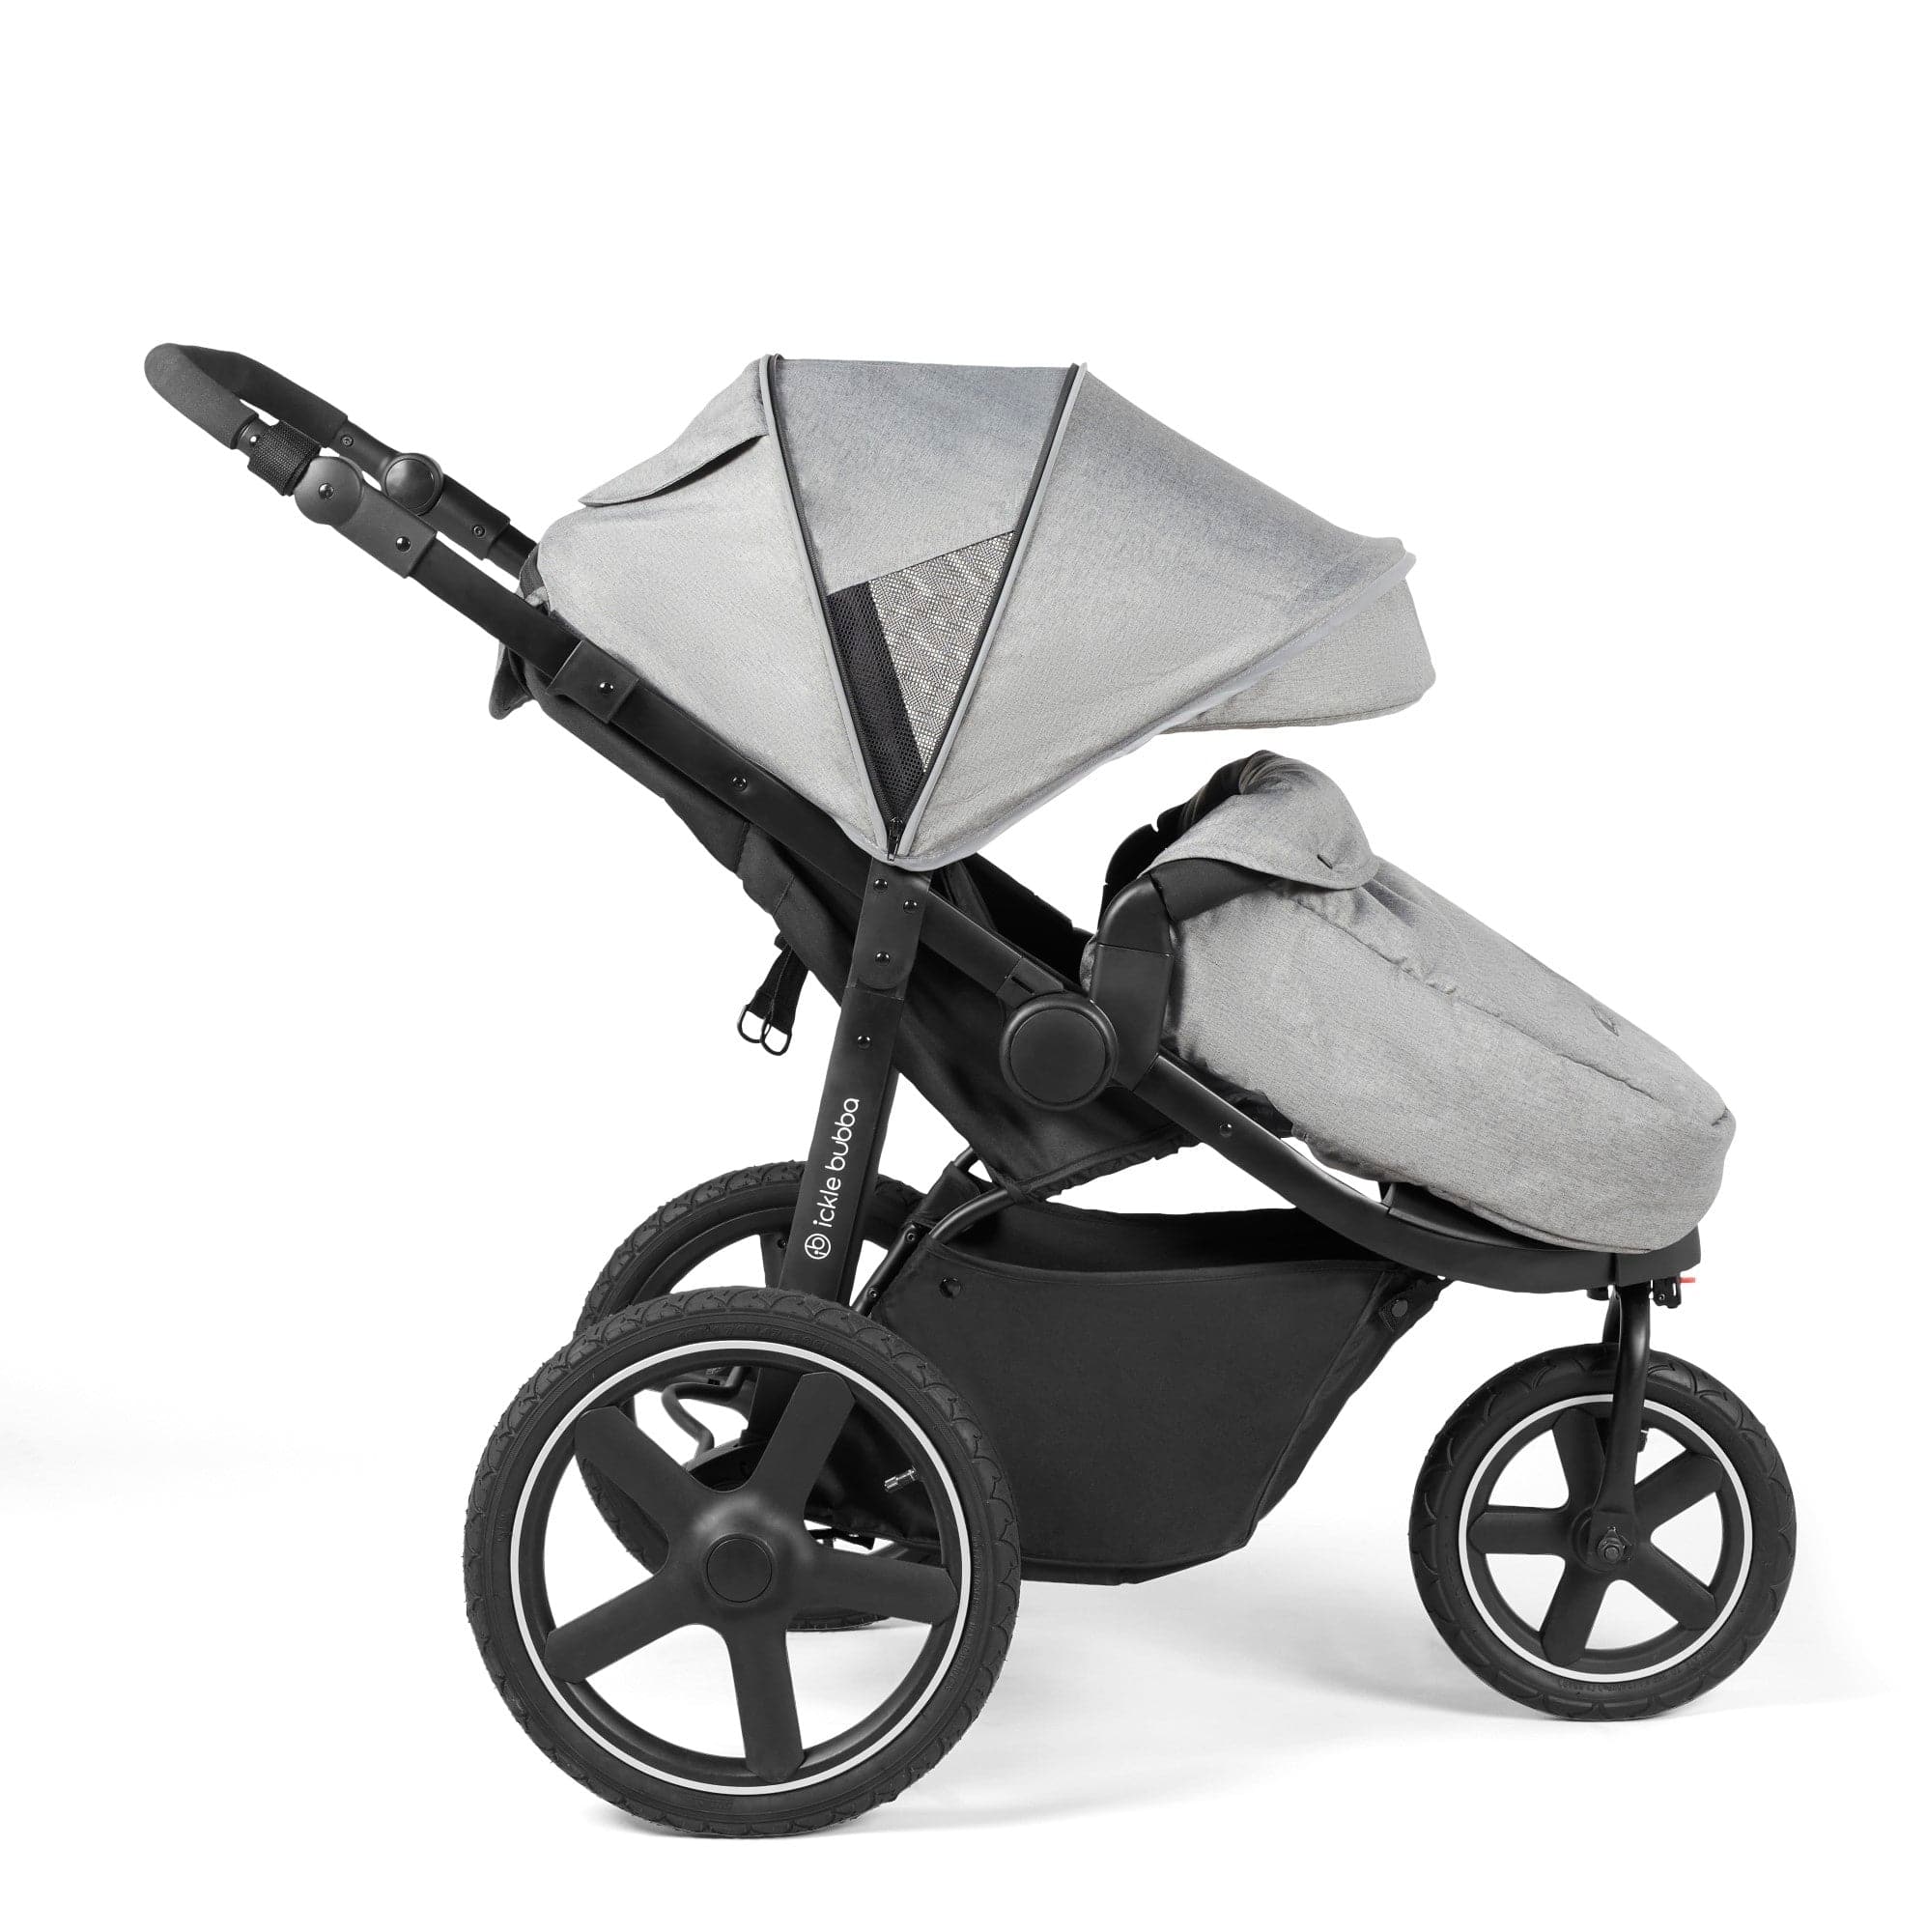 Ickle Bubba Venus Venus Max Jogger 3 Wheel Stroller I-Size Travel System with Isofix Base - Space Grey - For Your Little One